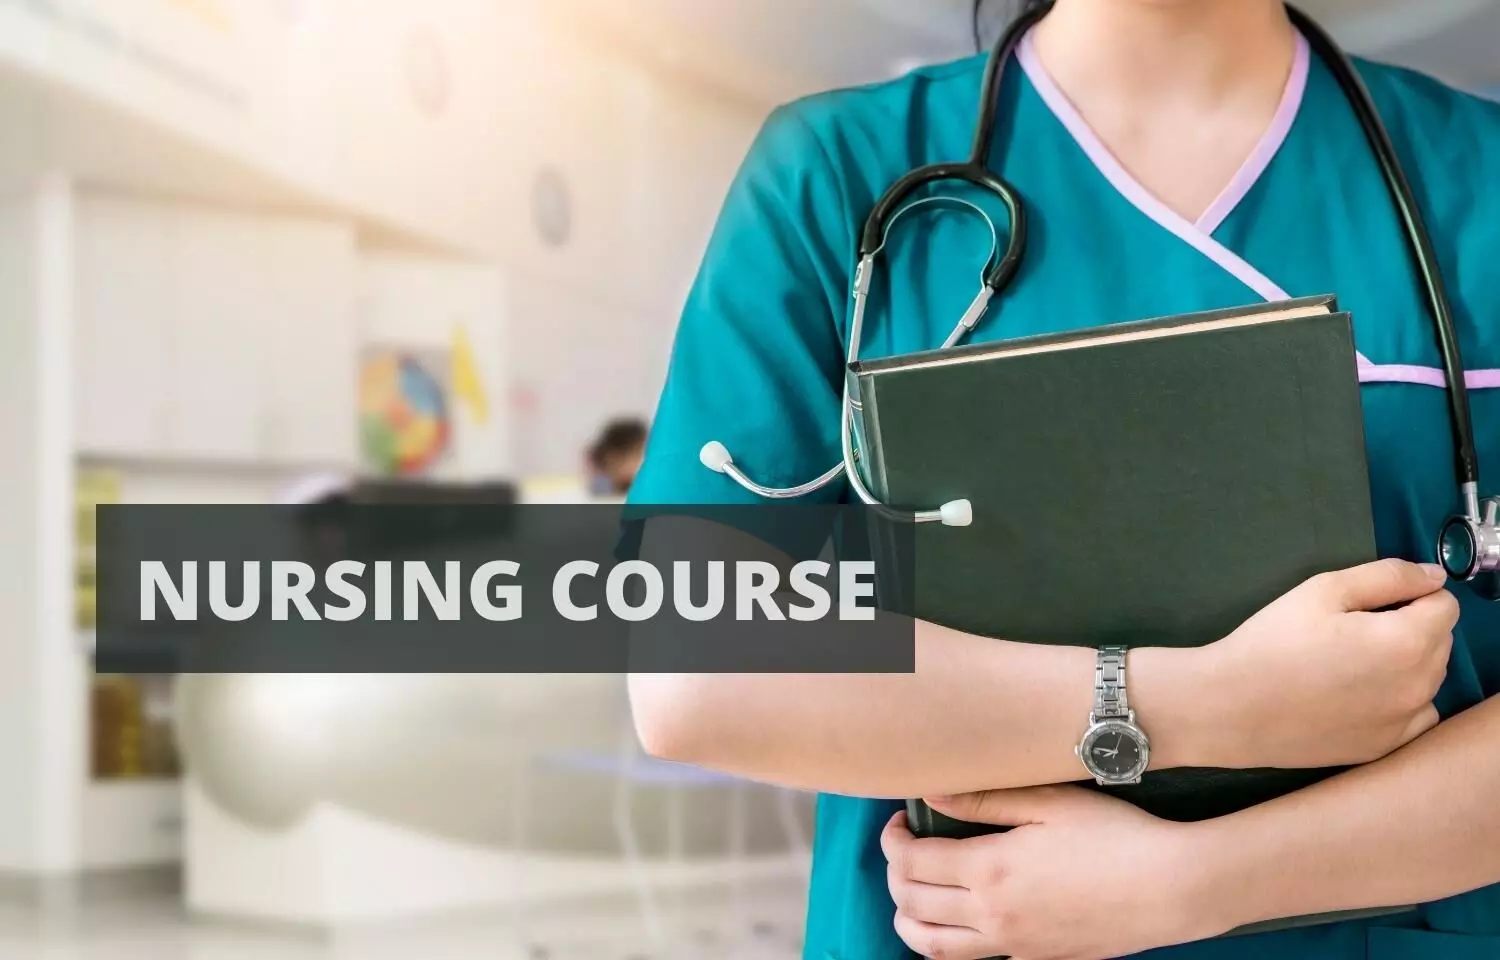 829 Seats Vacant For MSc Nursing Admissions in Tamil Nadu